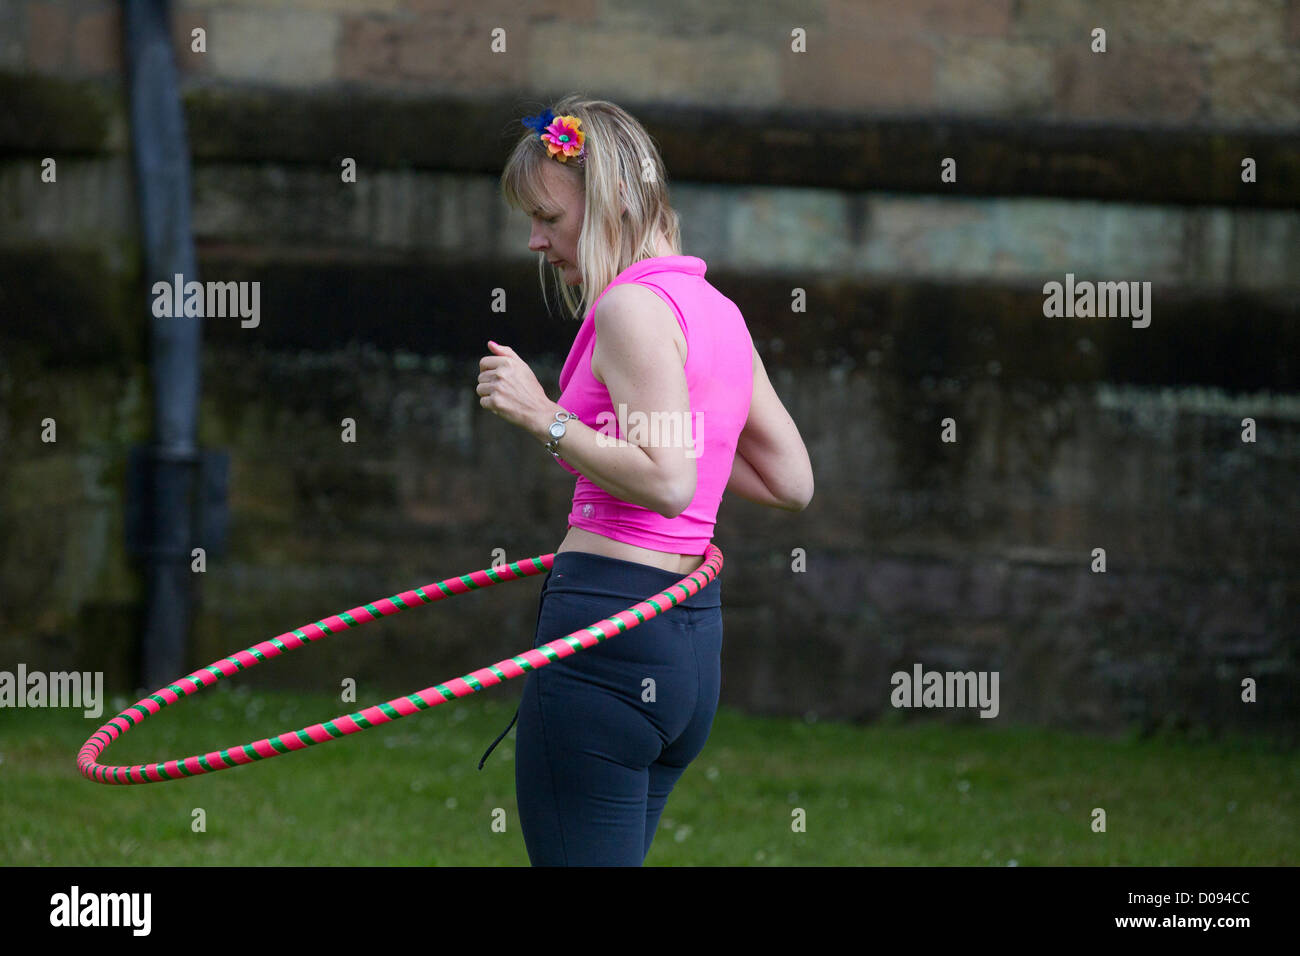 Lady with a Hula Hoop Stock Photo